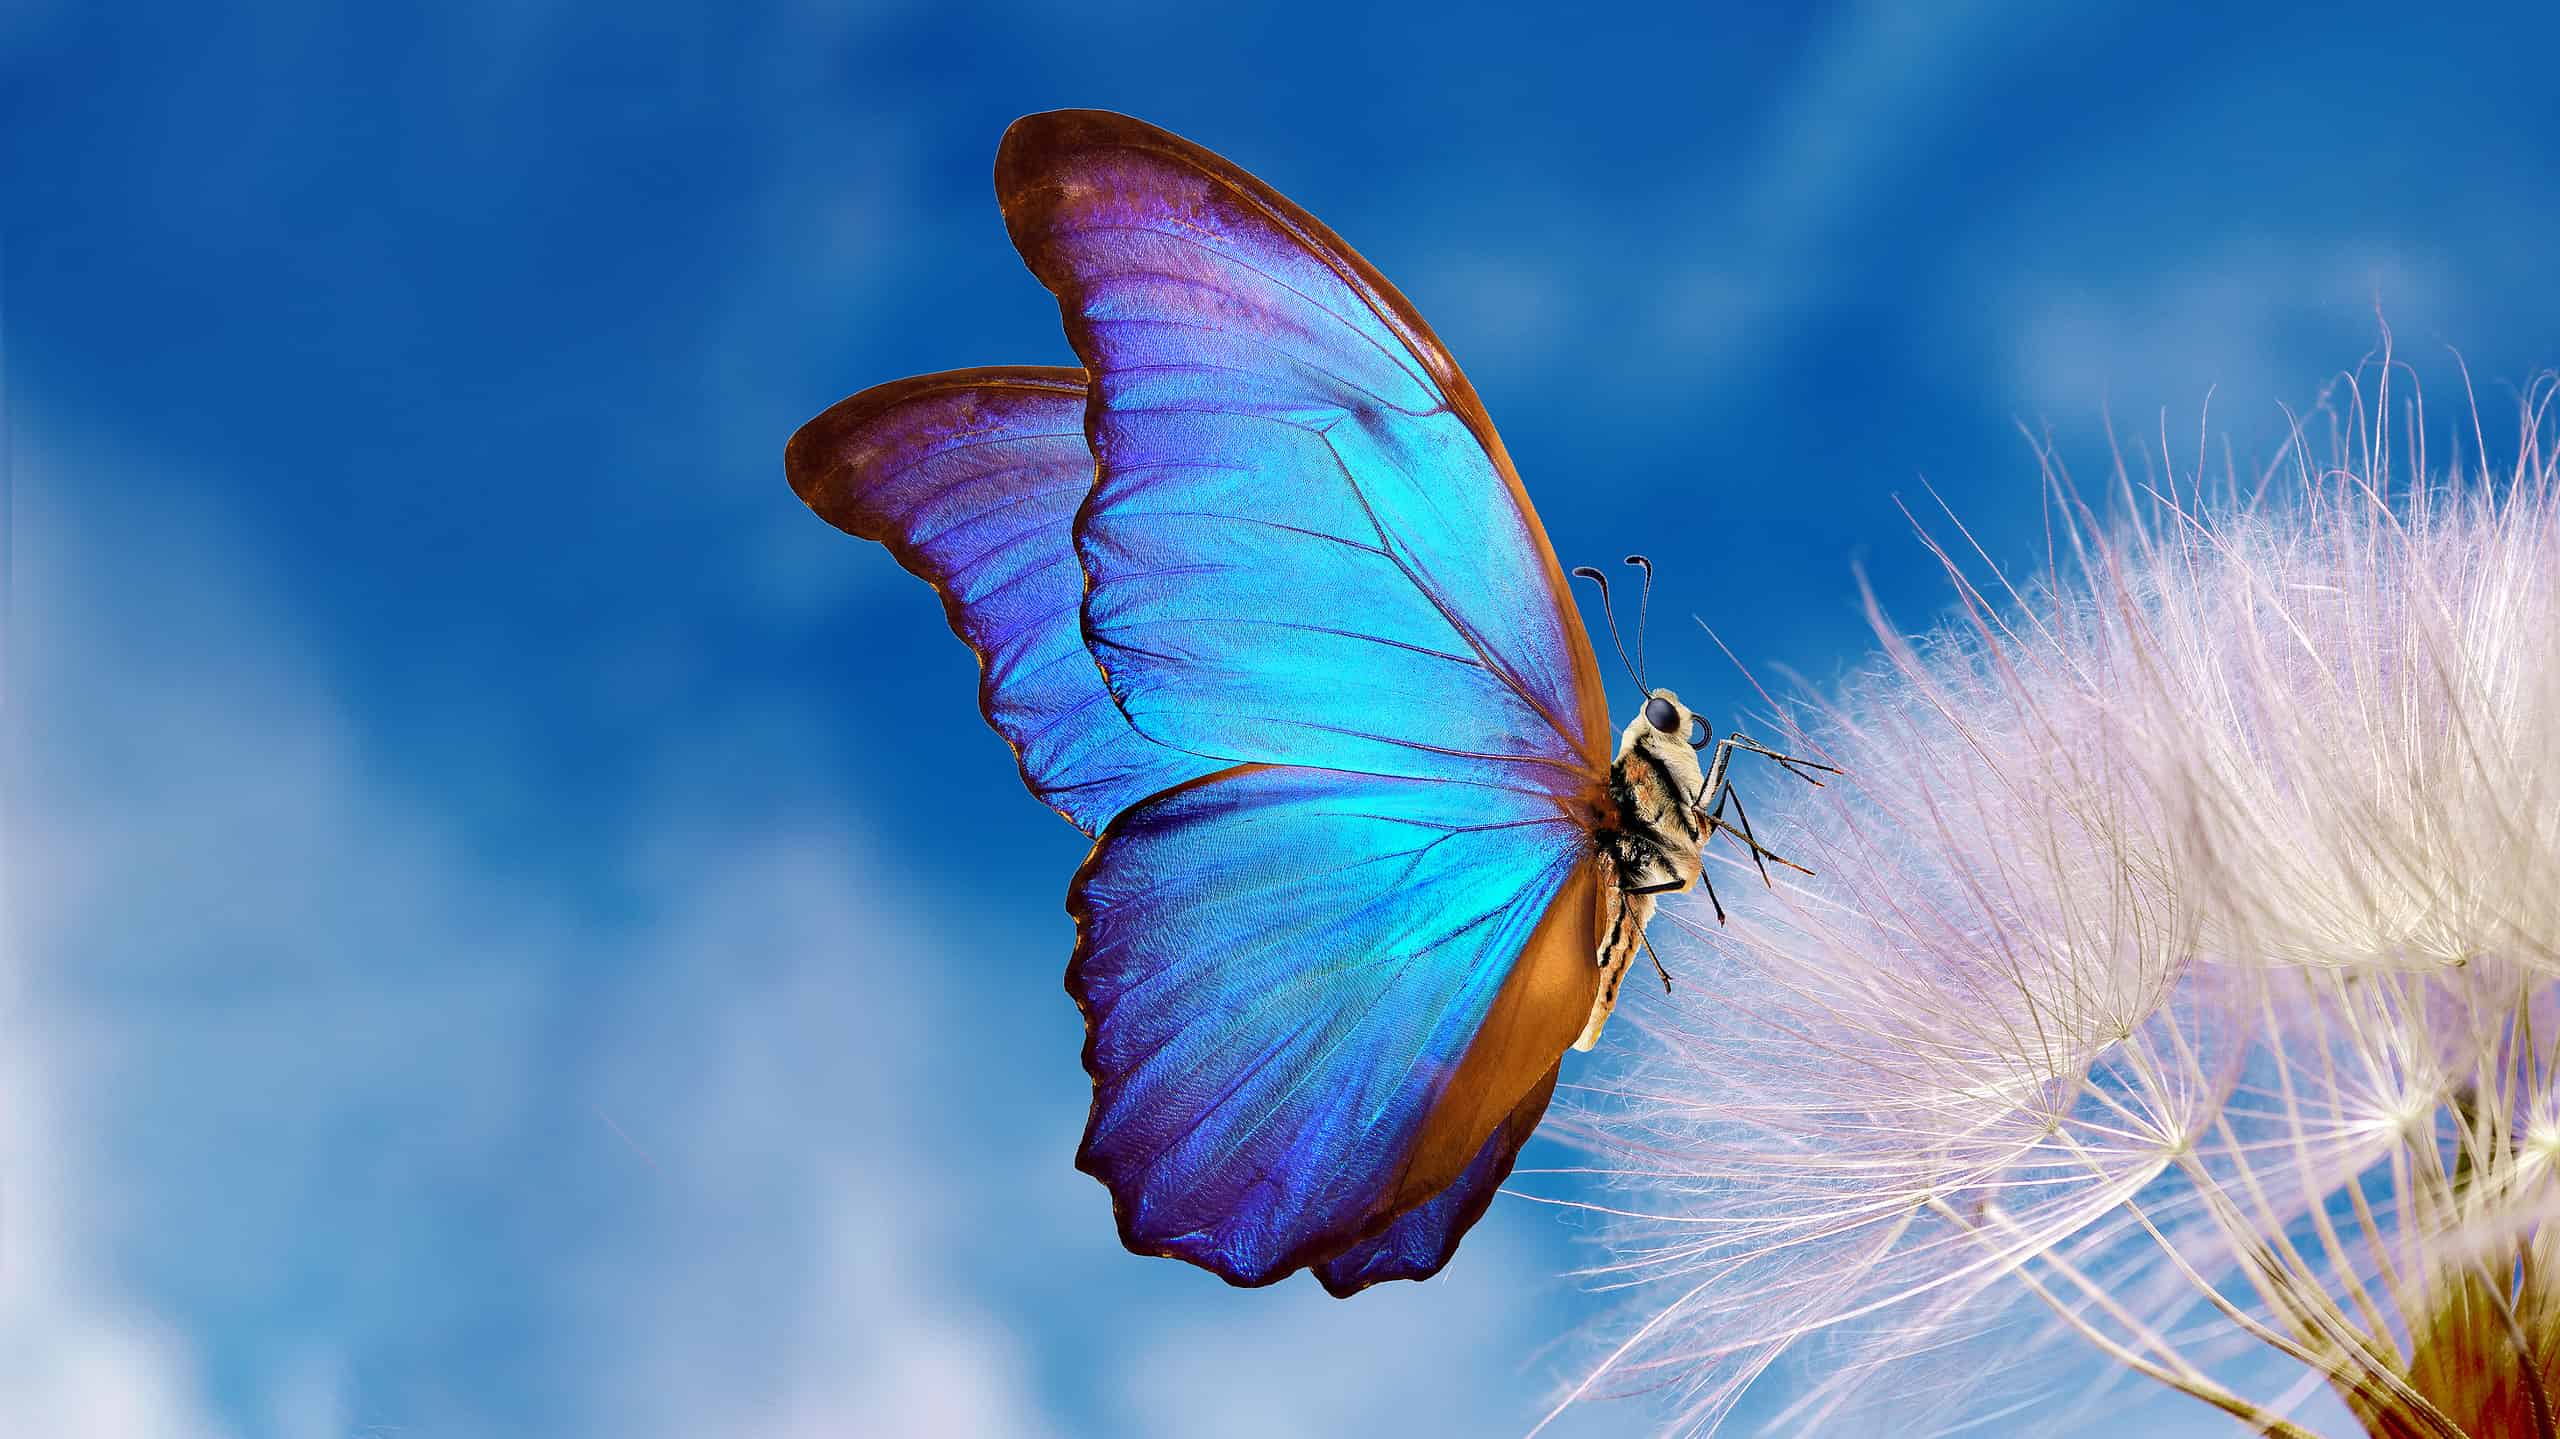 Purple Butterfly Sightings: Spiritual Meaning and Symbolism - A-Z